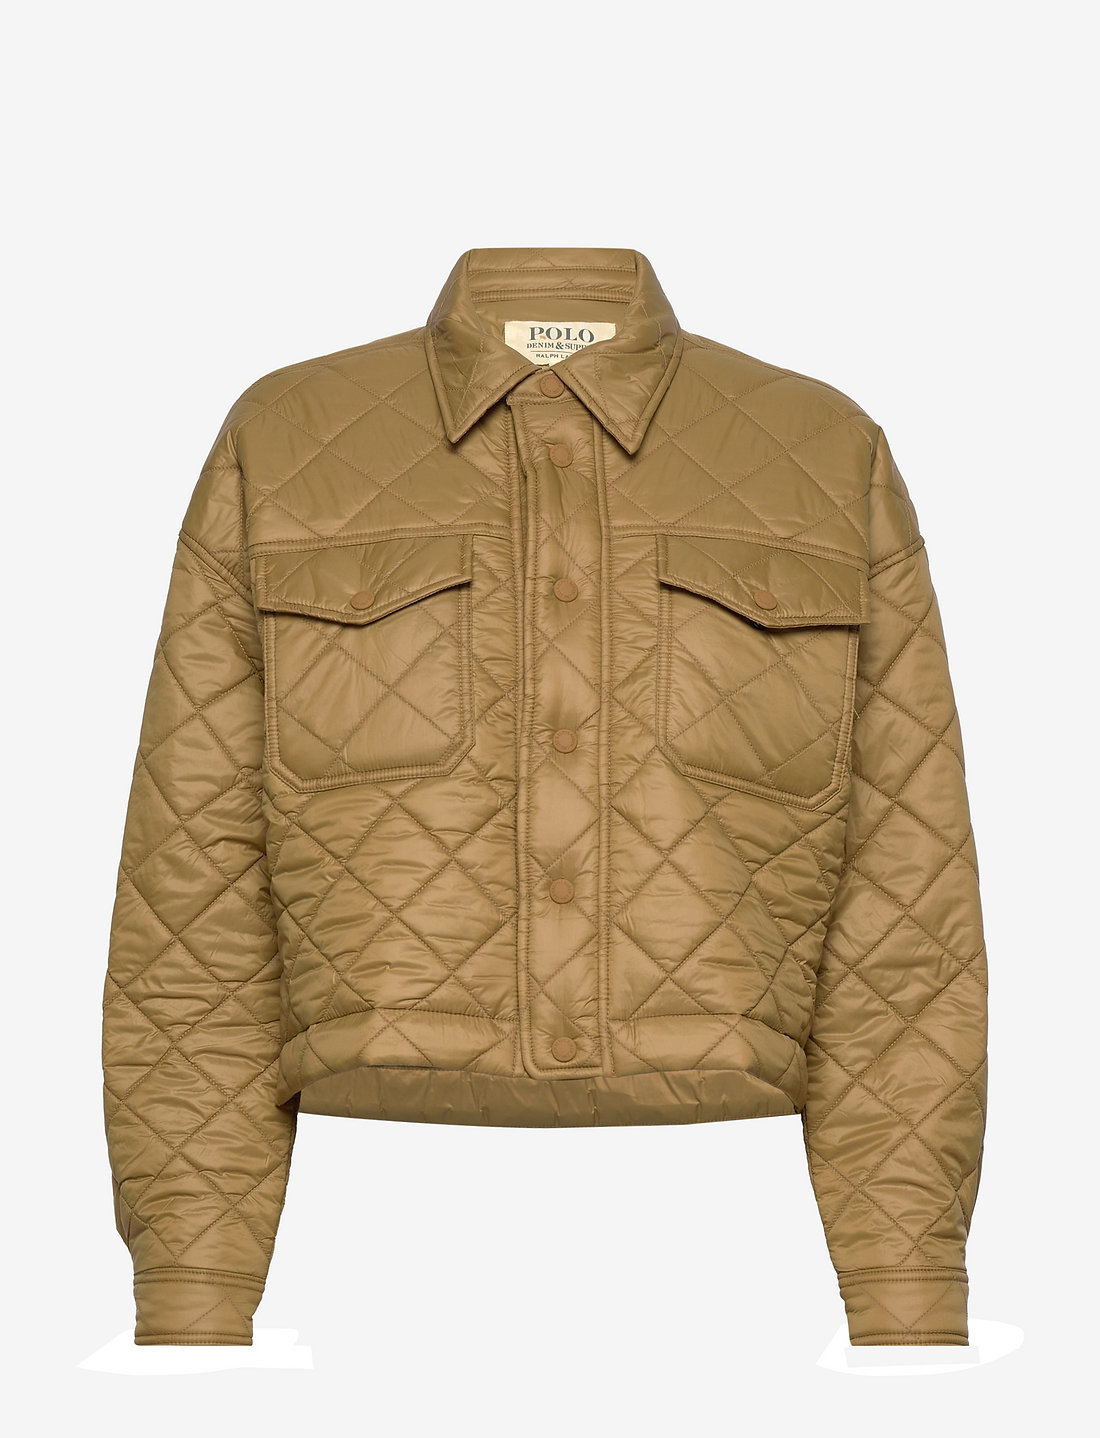 Ralph Lauren Water-repellant Cropped Quilted Jacket - 399 €. Buy Quilted jackets from Polo Ralph Lauren online at Boozt.com. Fast delivery and easy returns